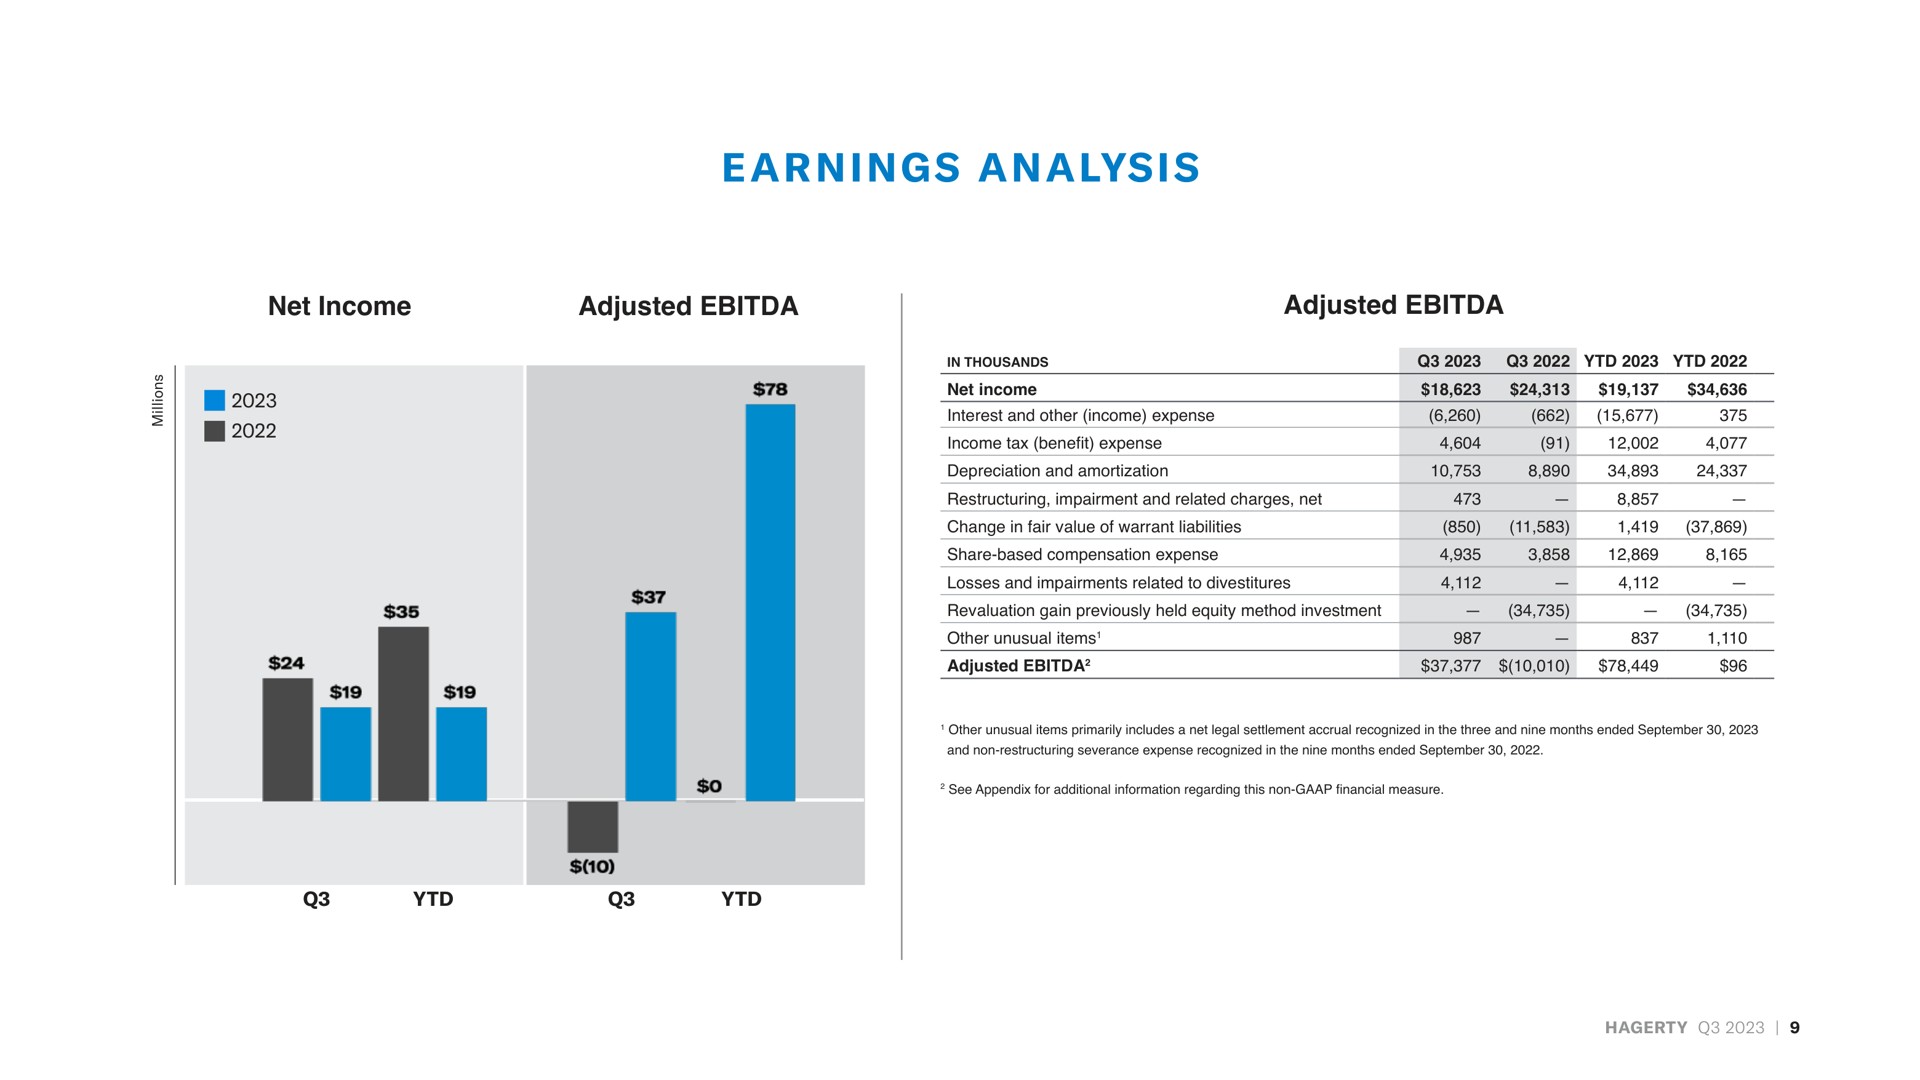 a in ana lysis earnings analysis | Hagerty